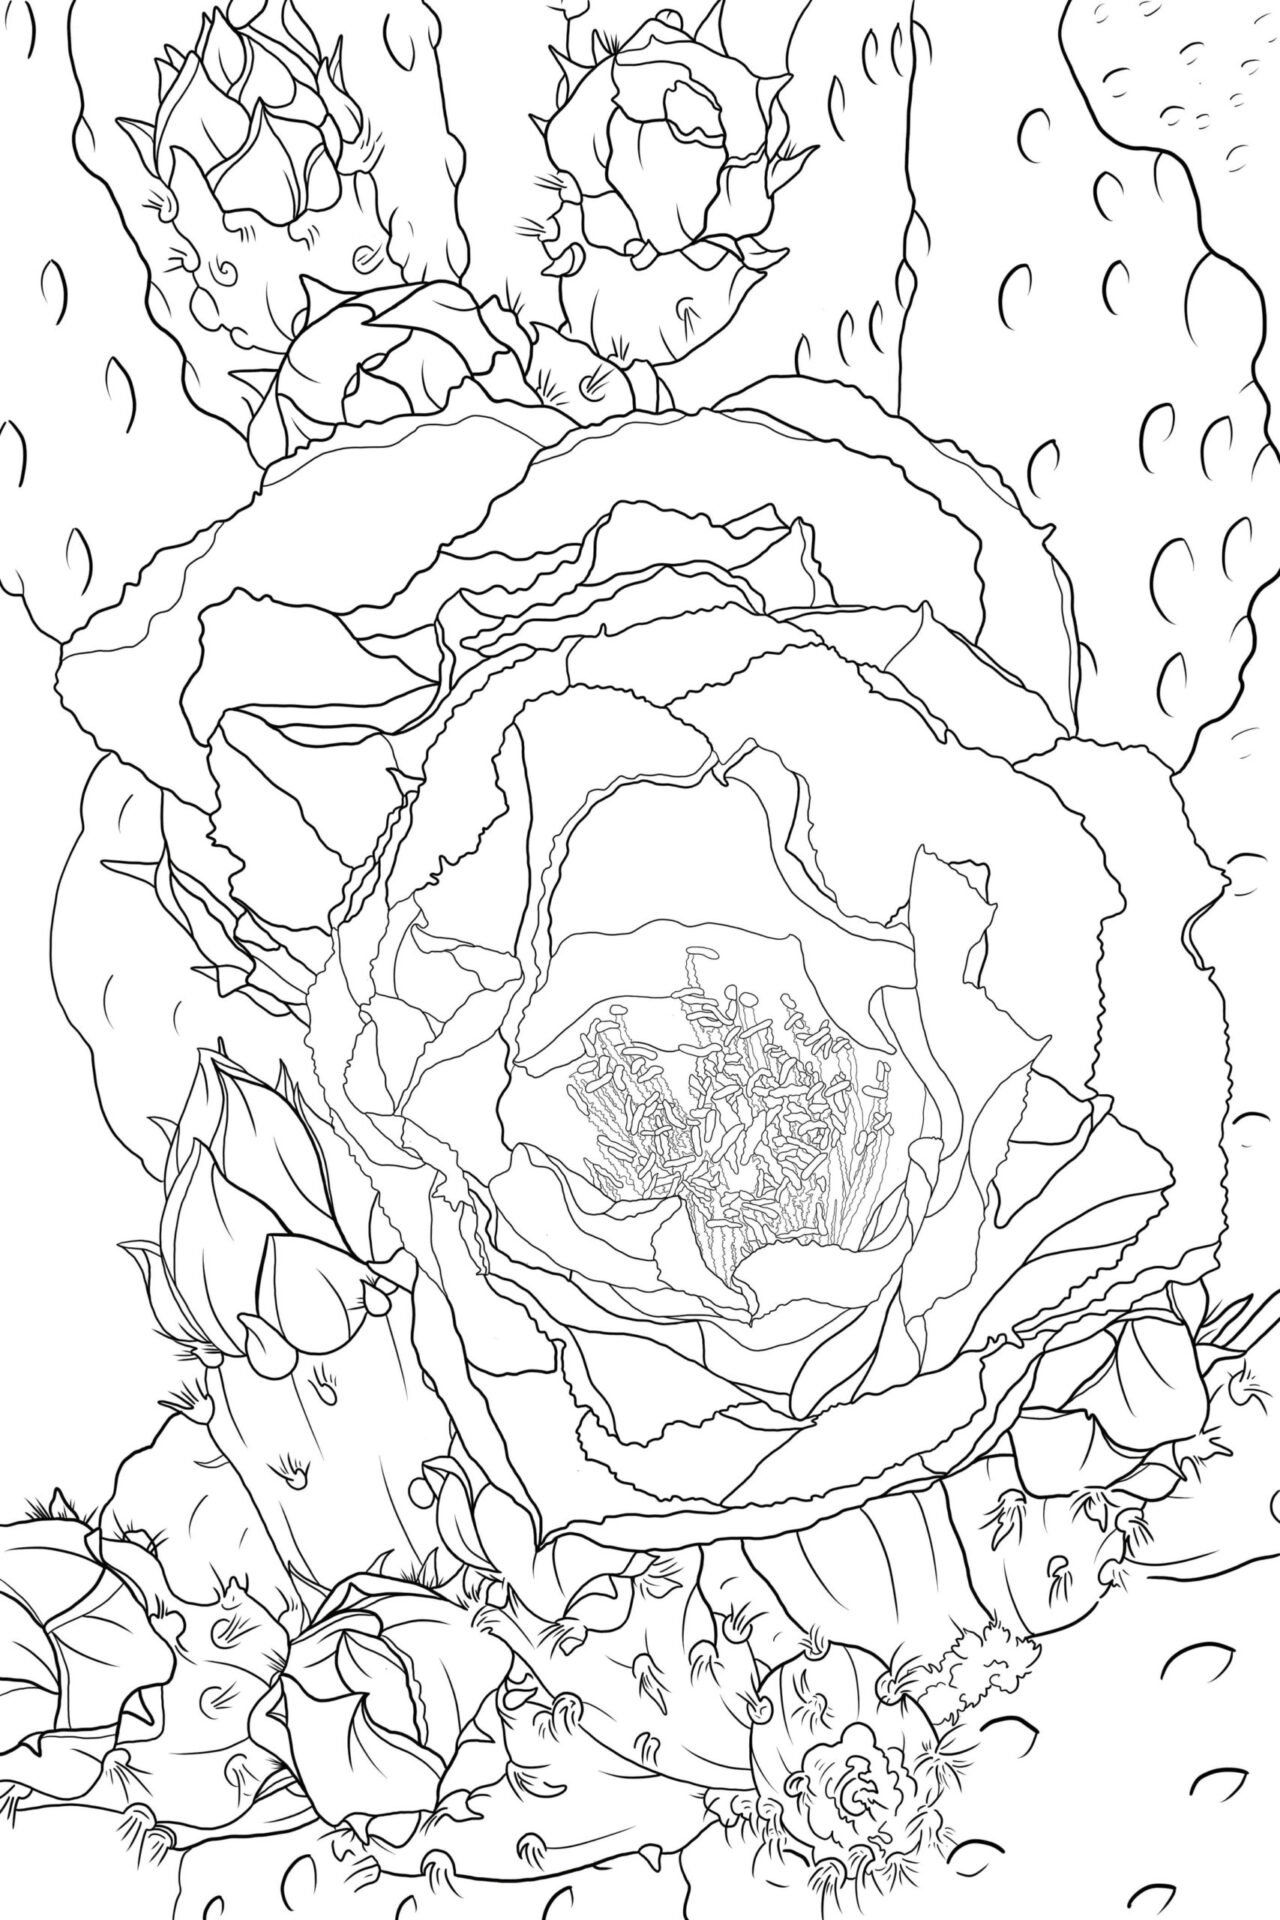 DBG Prickly Pear Coloring Page